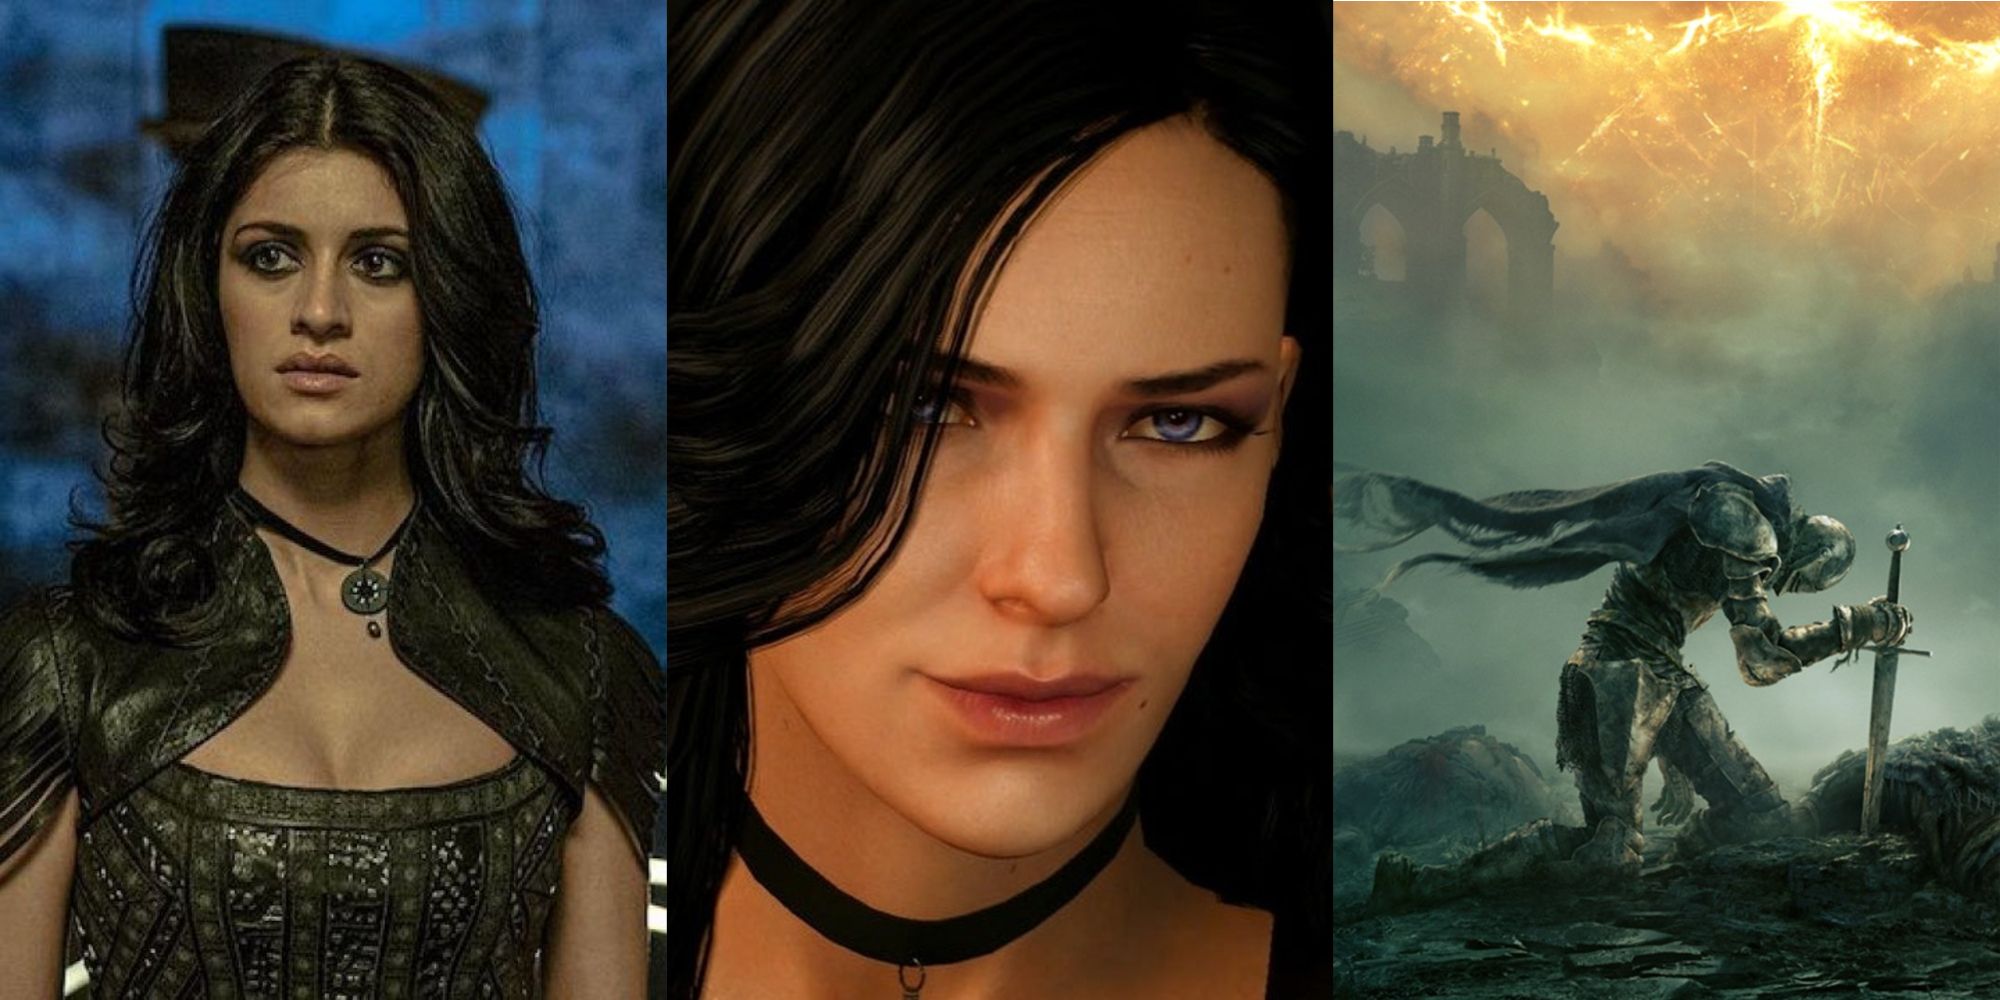 One of the most beloved Witcher 3 characters in Yennefer has found her way to one of the most popular games this year thanks to one Elden Ring fan.